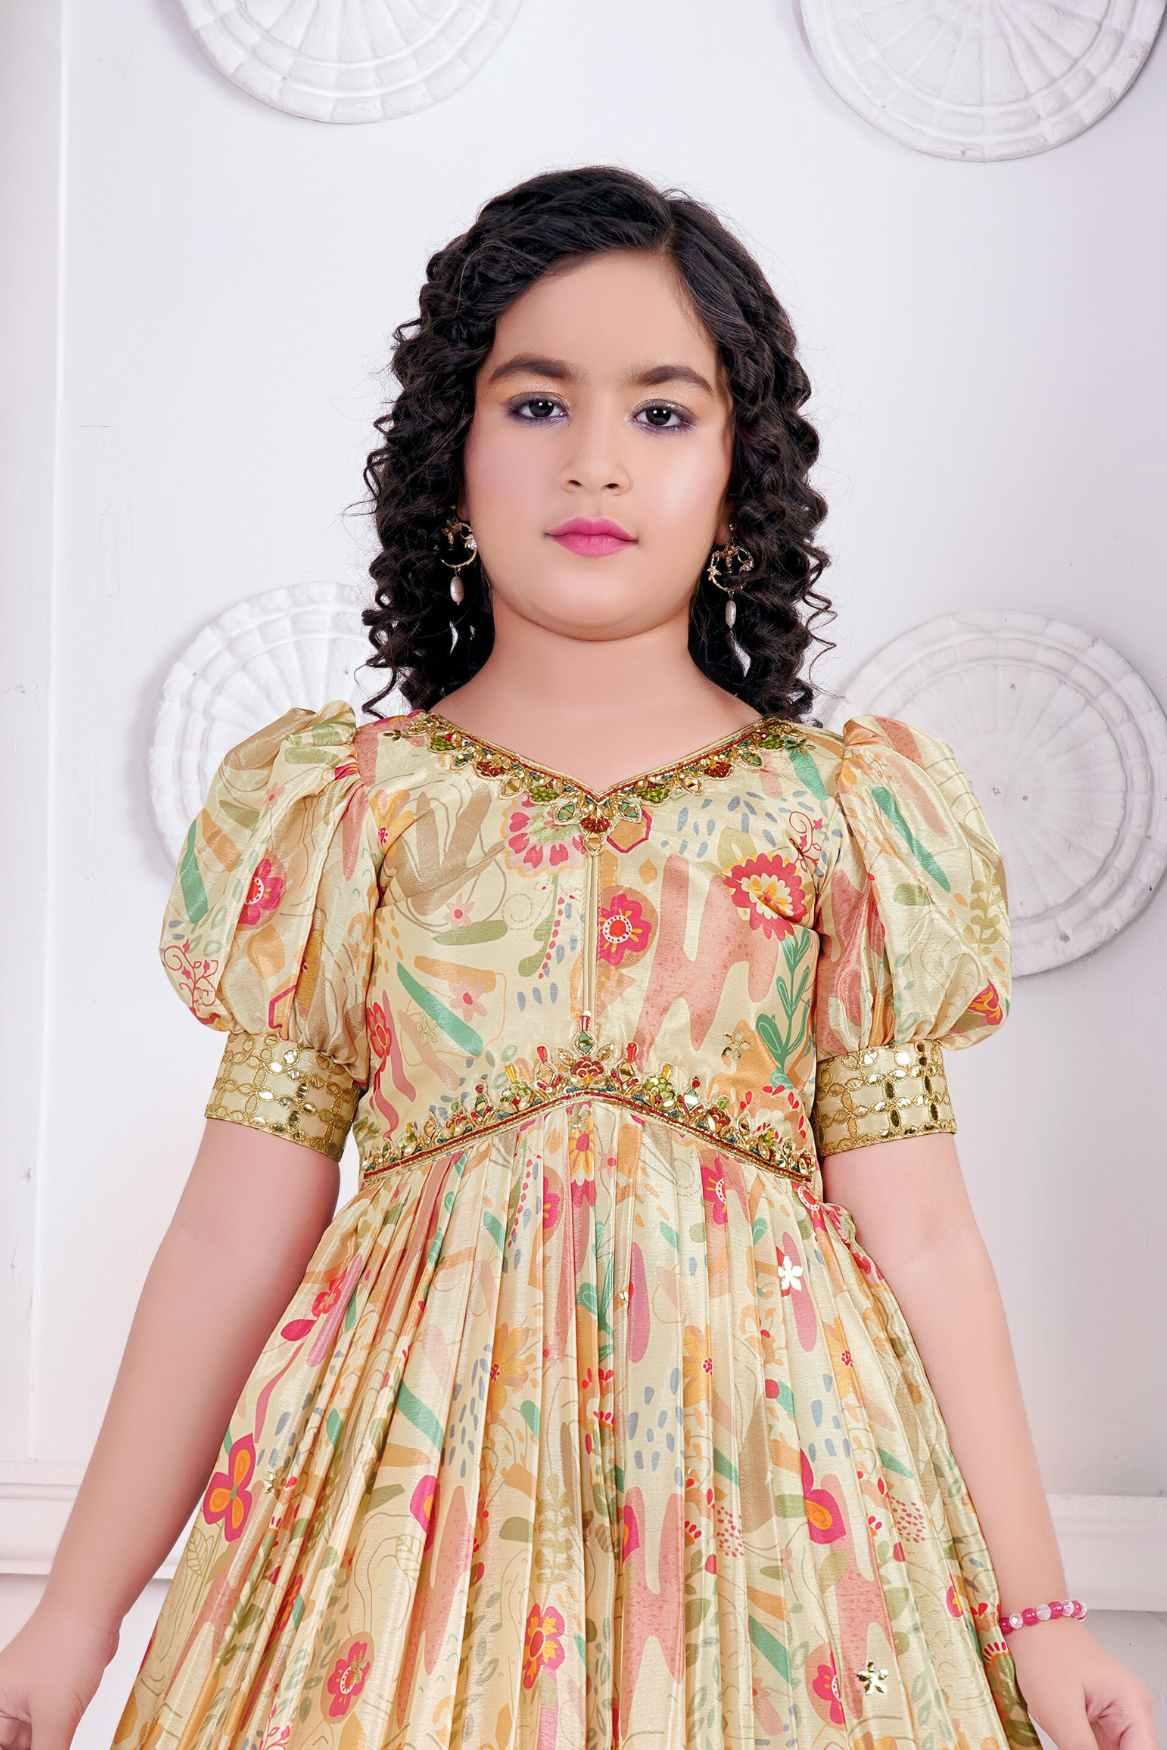 Elegant Cream Floral Printed Gown With Mirror Work For Girls - Lagorii Kids